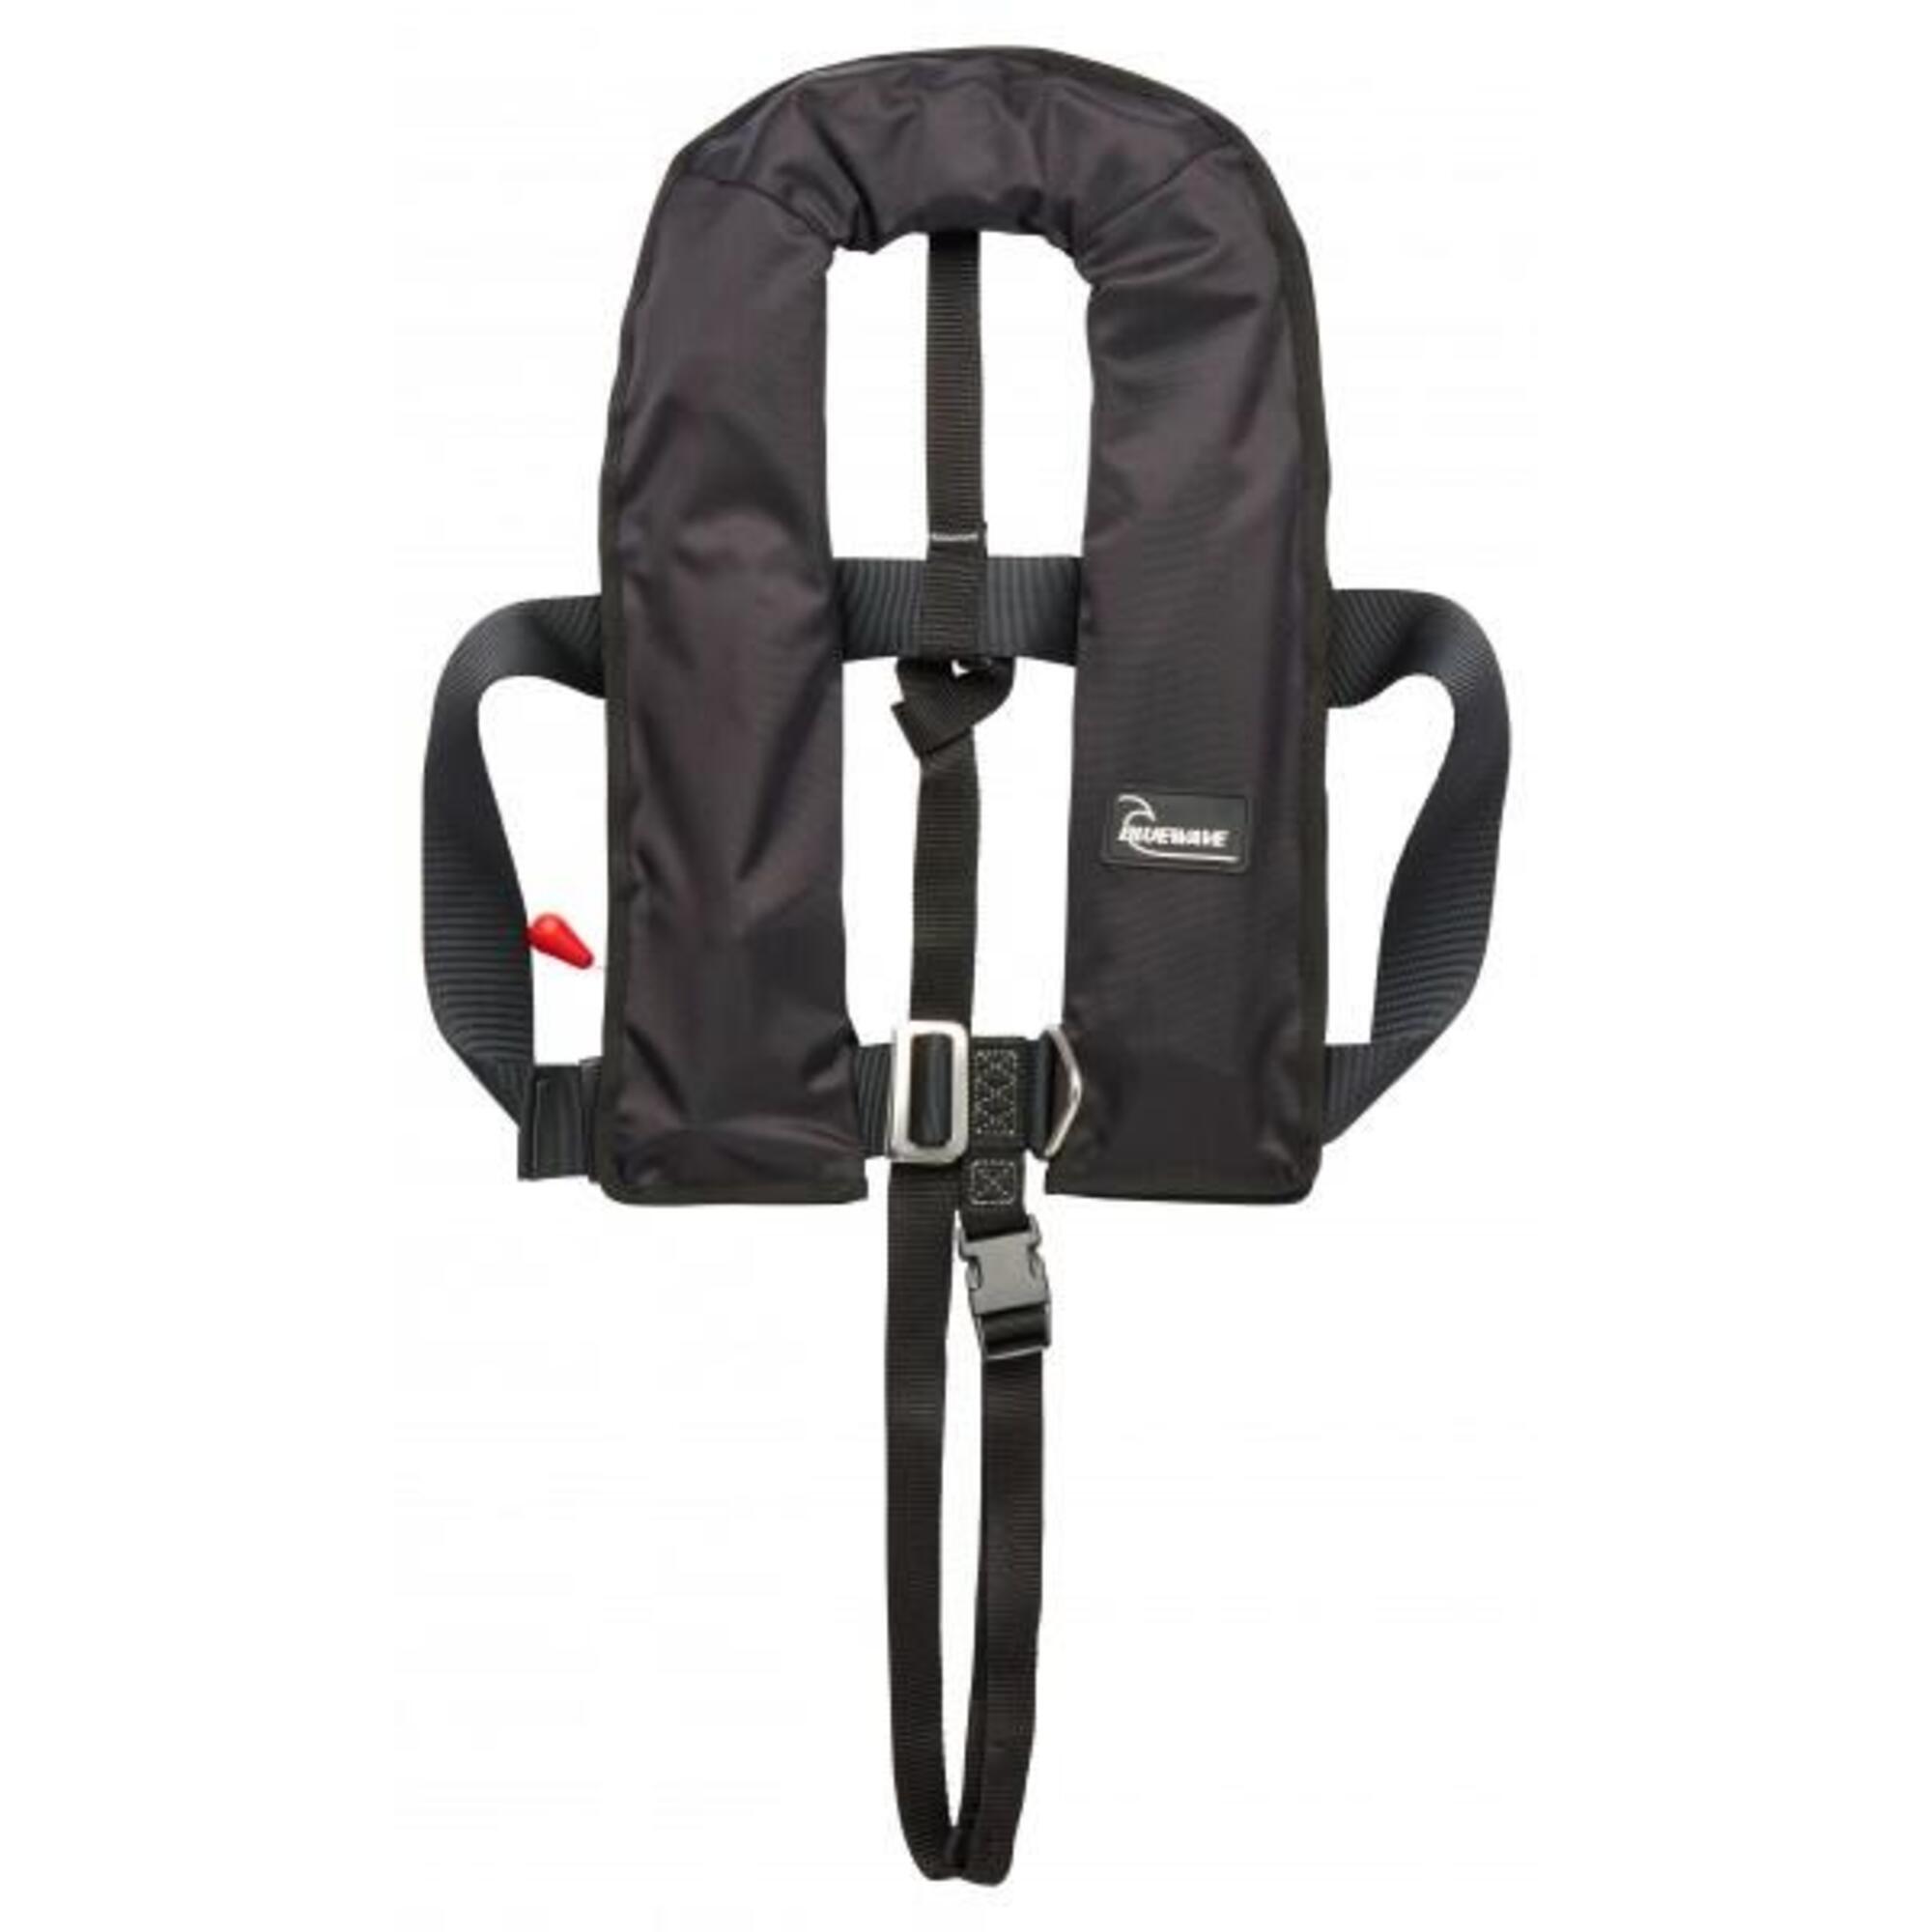 Bluewave 150N Automatic Lifejacket with harness & crutch strap 1/2